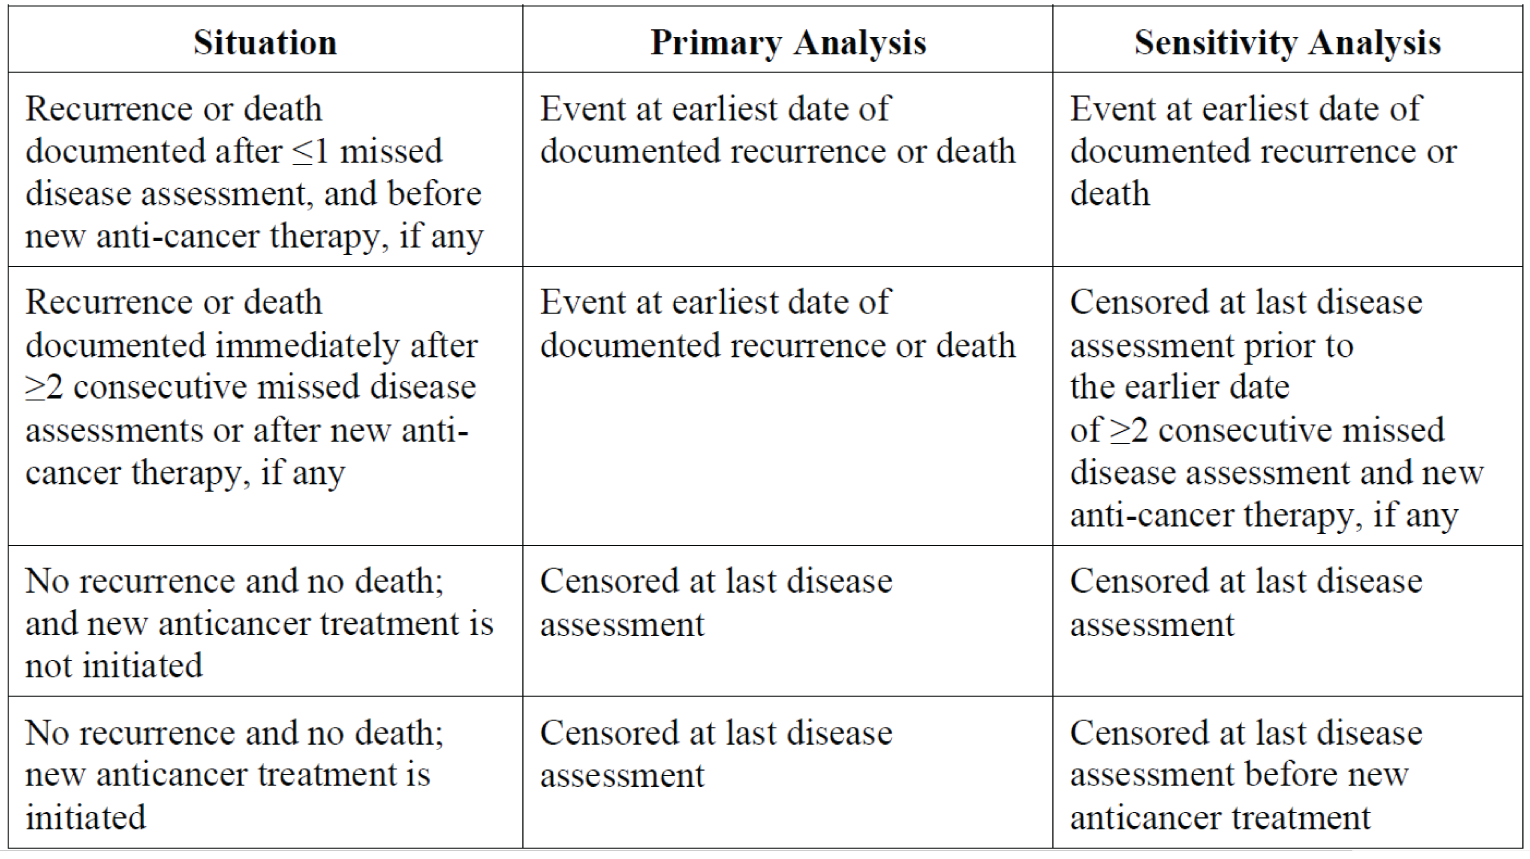 A table outlining the censoring rules for recurrence-free survival based on the situation and what the corresponding primary and sensitivity analysis.